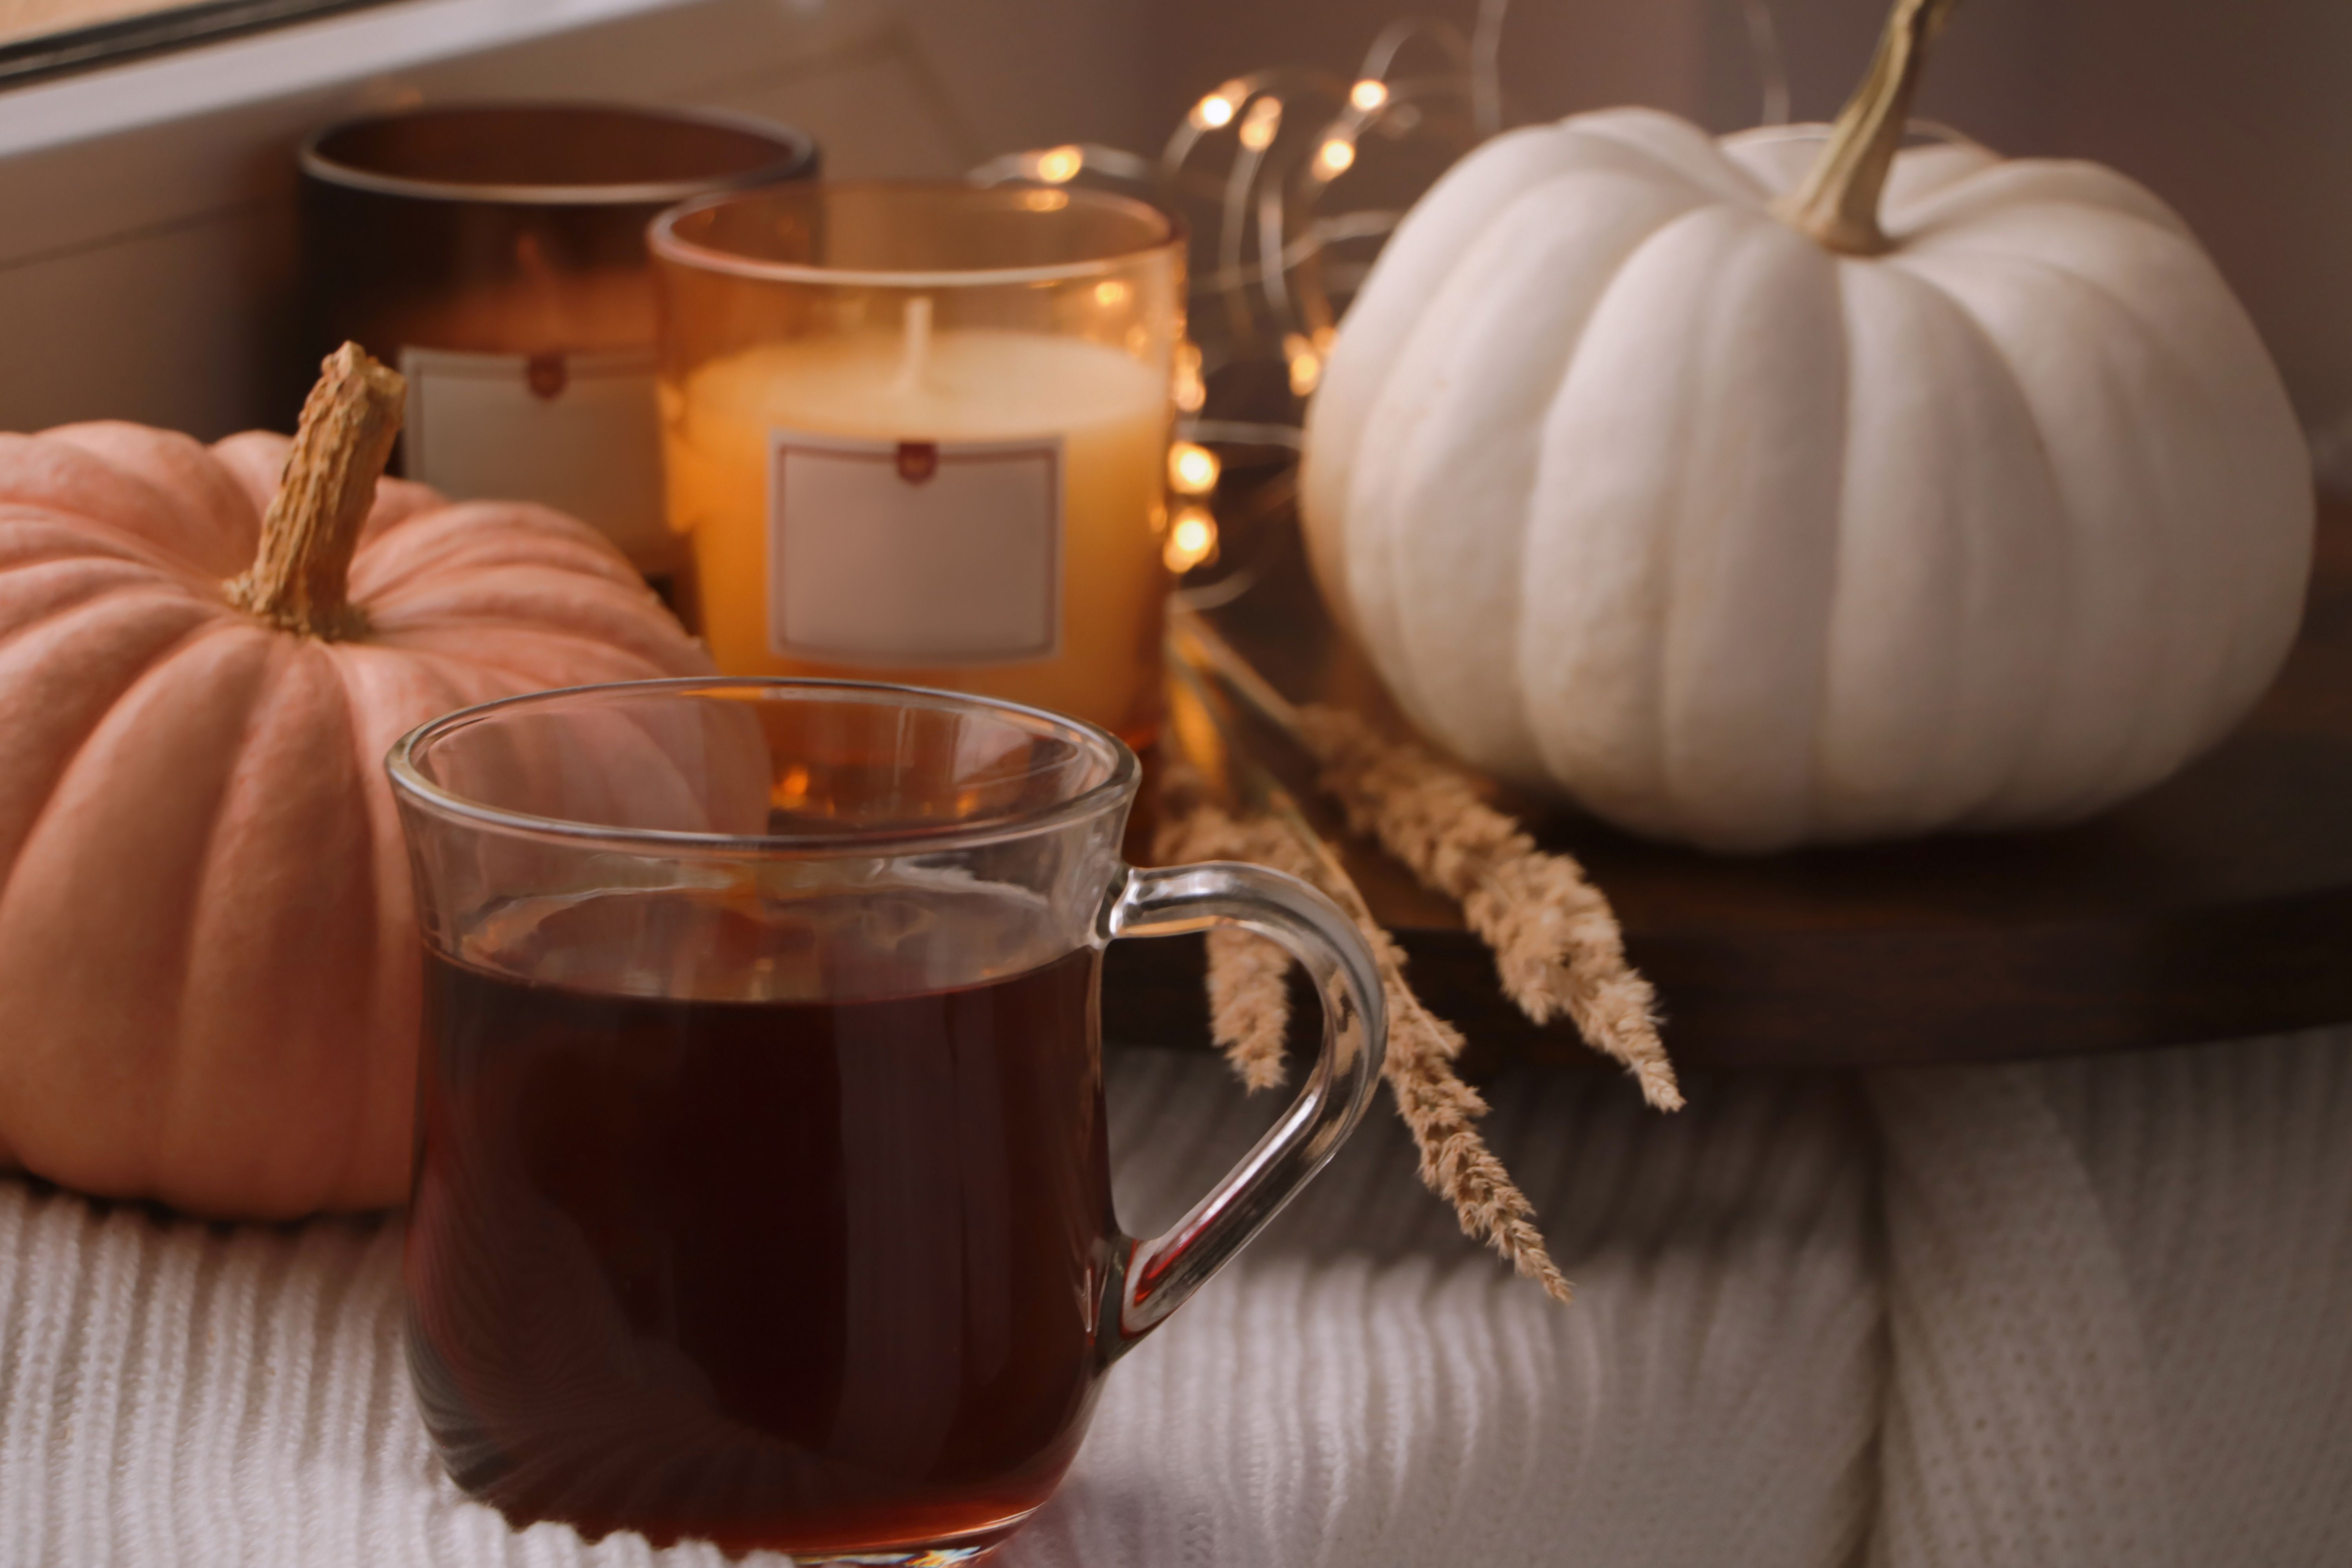 Autumn-scented candles make the house extra cozy for Thanksgiving guests.